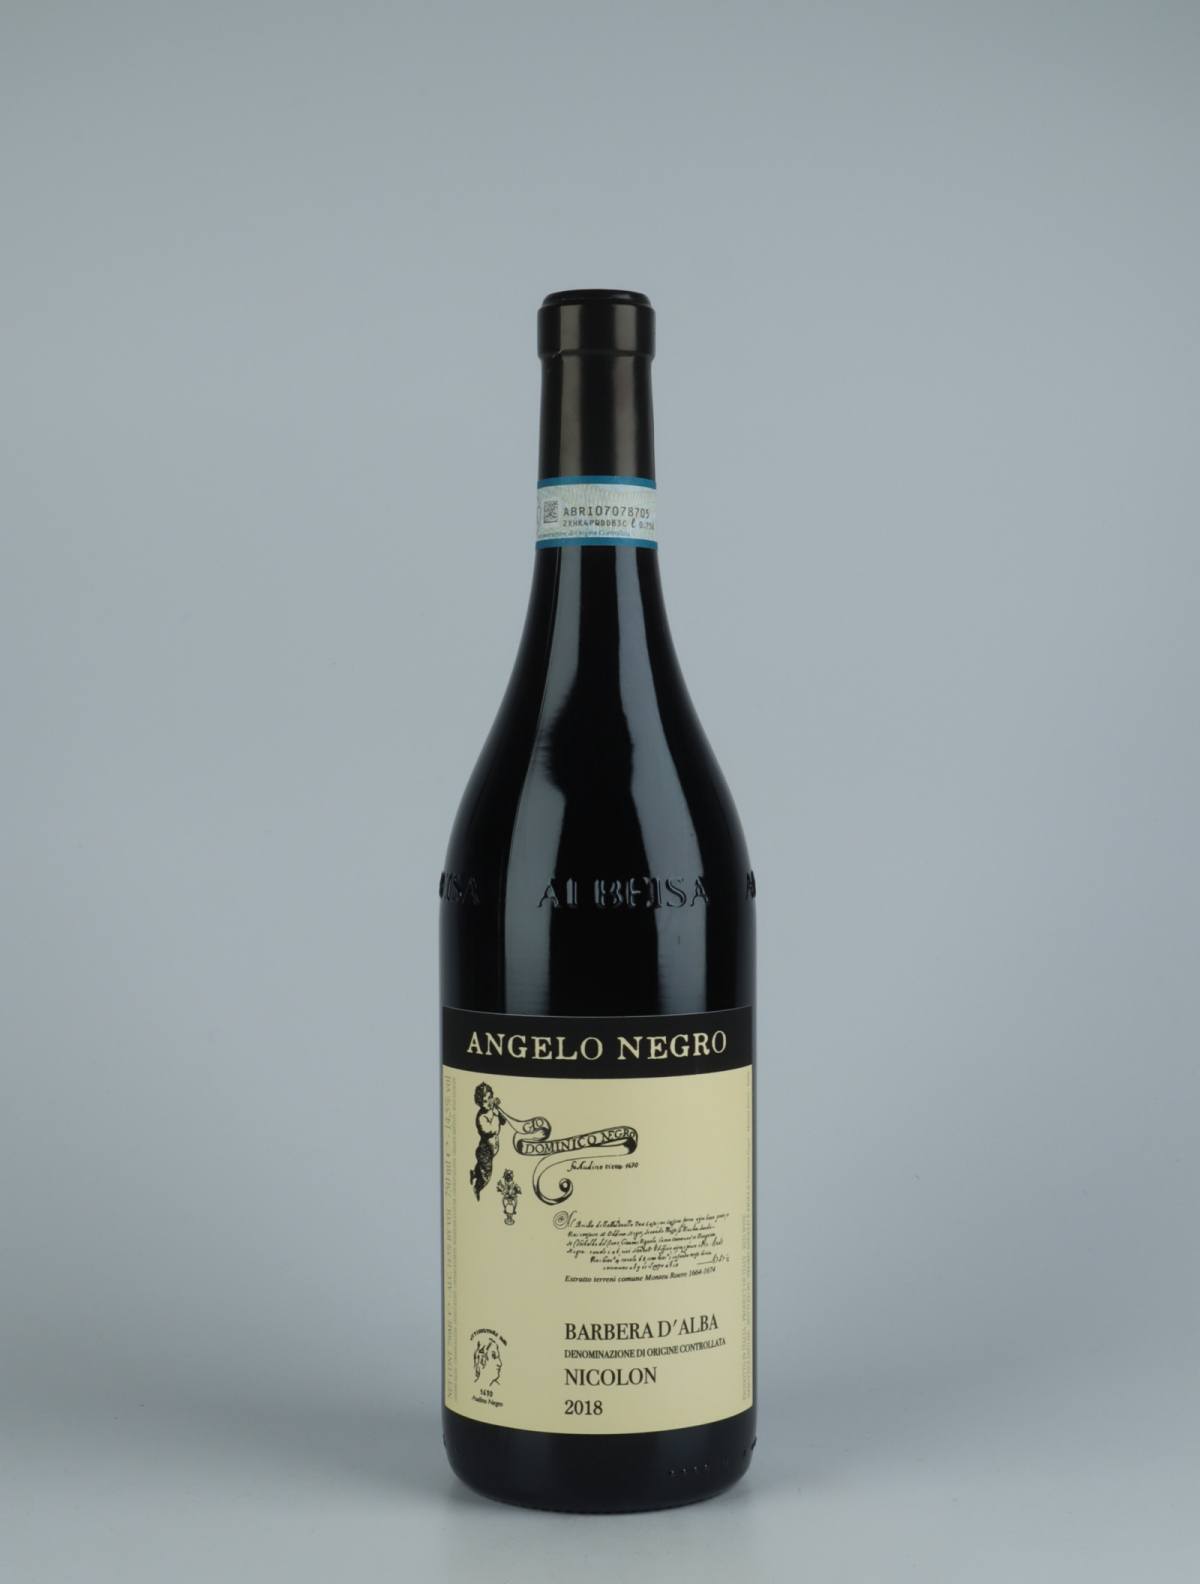 A bottle 2018 Barbera d'Alba - Nicolon Red wine from , Piedmont in Italy